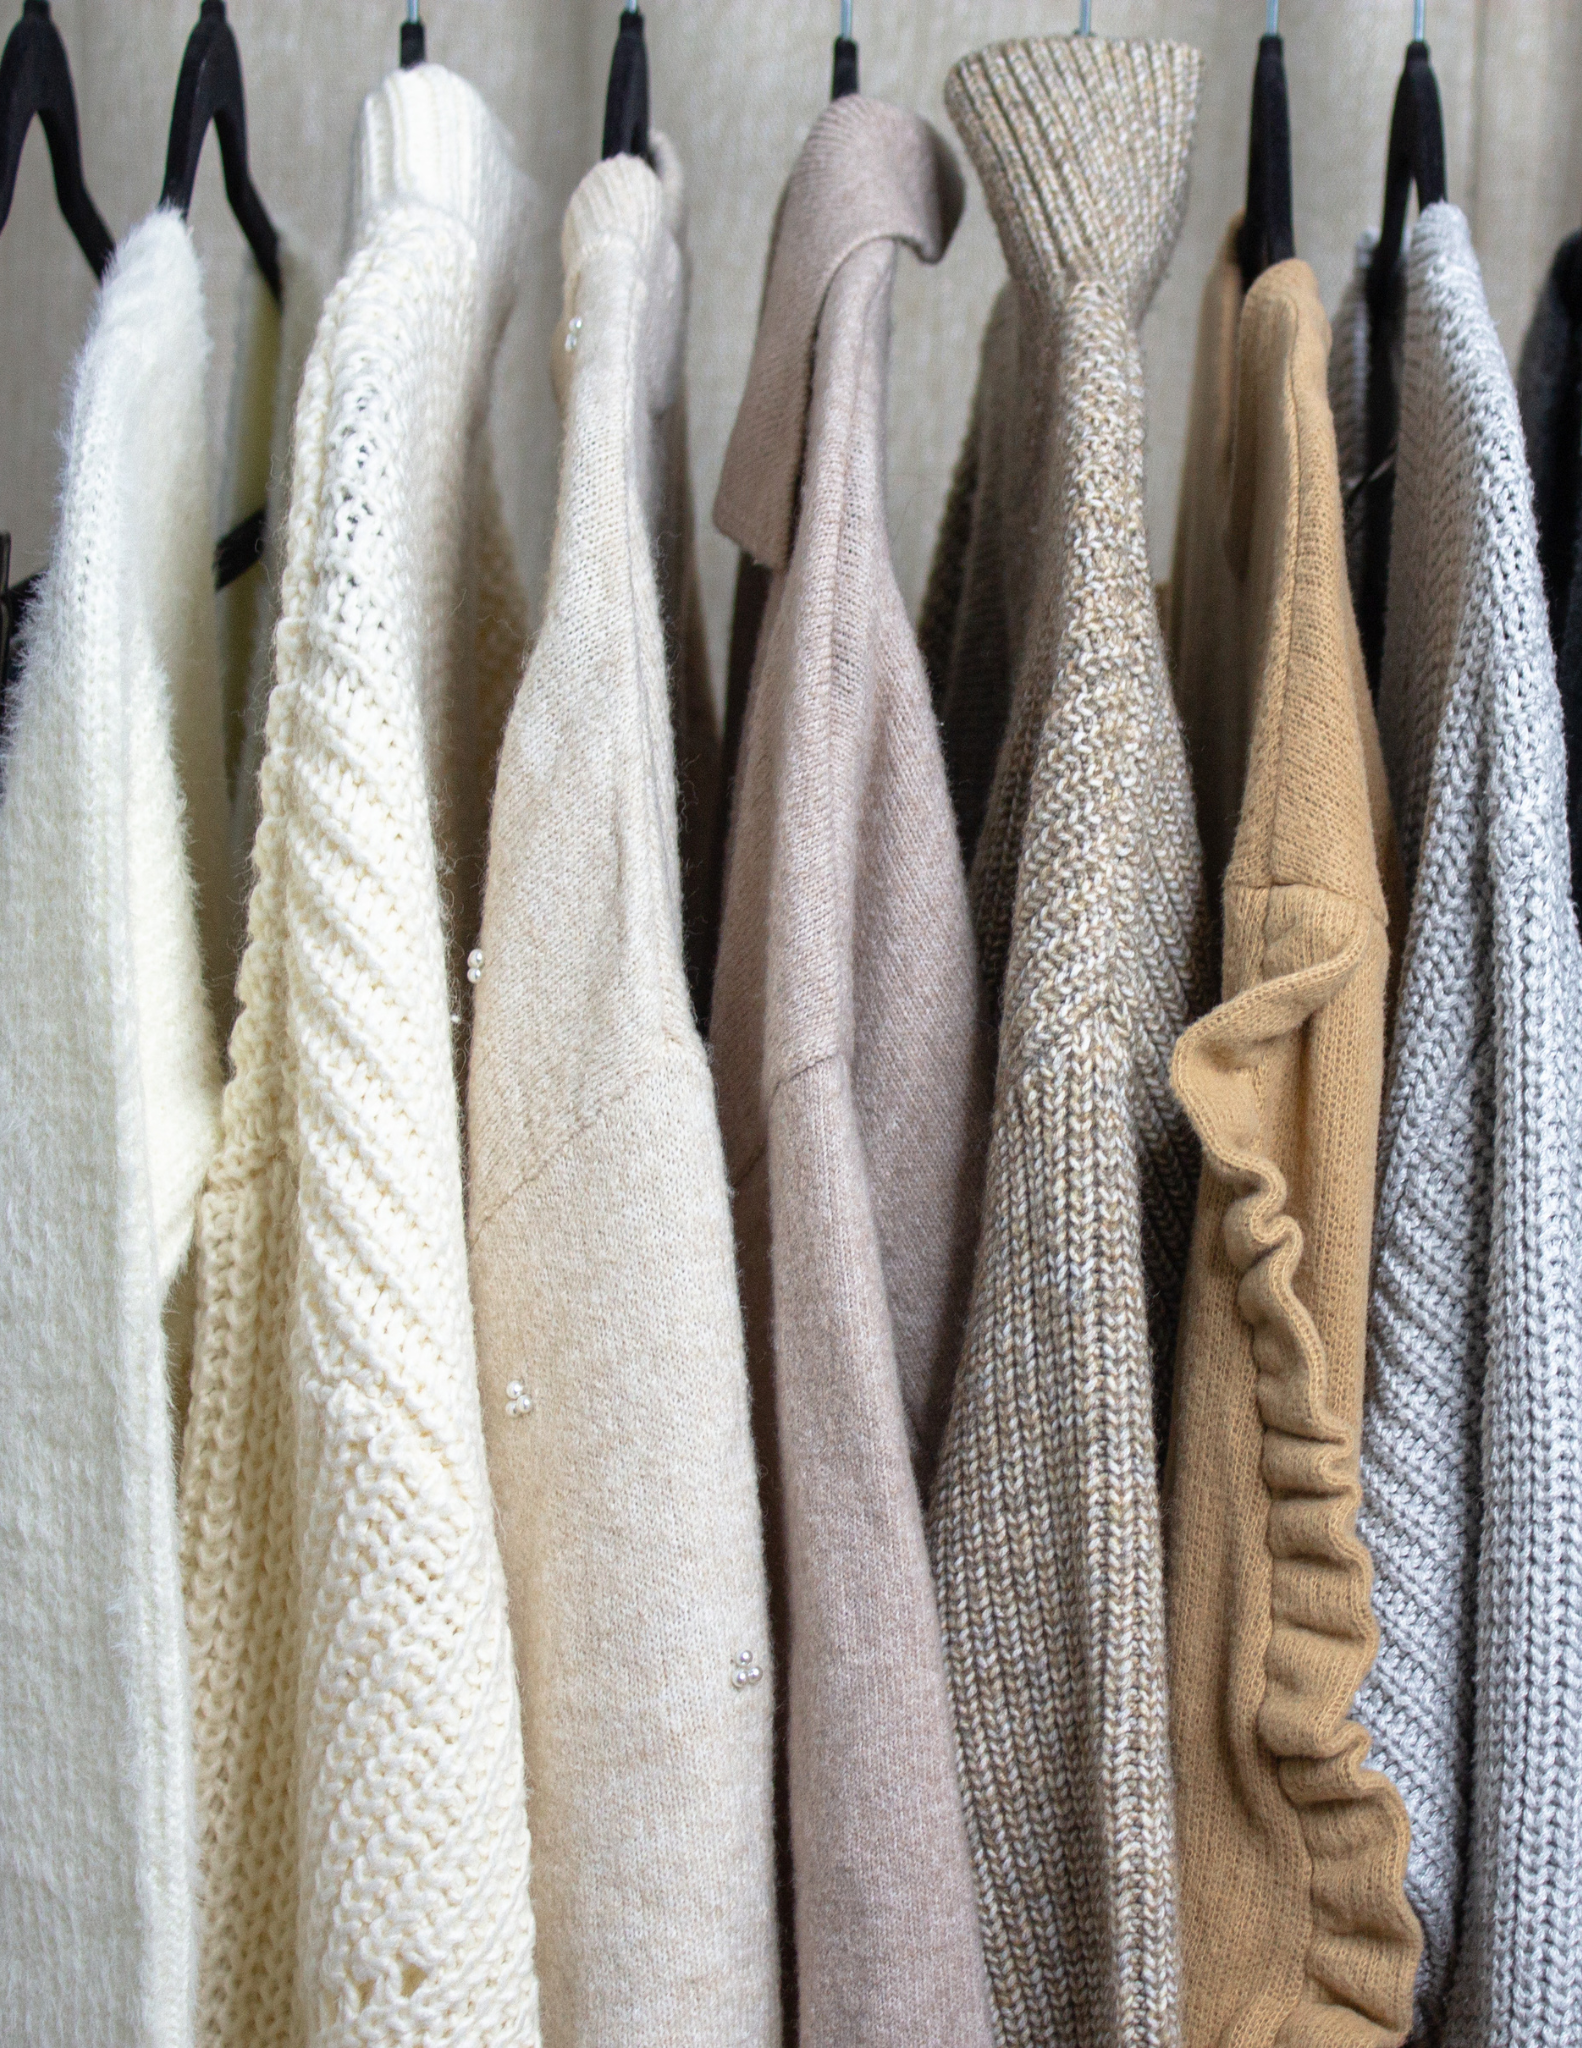 In the image, a clothing rack displays an array of luxurious cashmere and sophisticated fine-knit sweaters. The collection includes various colors such as white, cream, beige, light brown, mustard, and light blue, embodying quiet luxury, timeless elegance, and classic, neutral color palette.